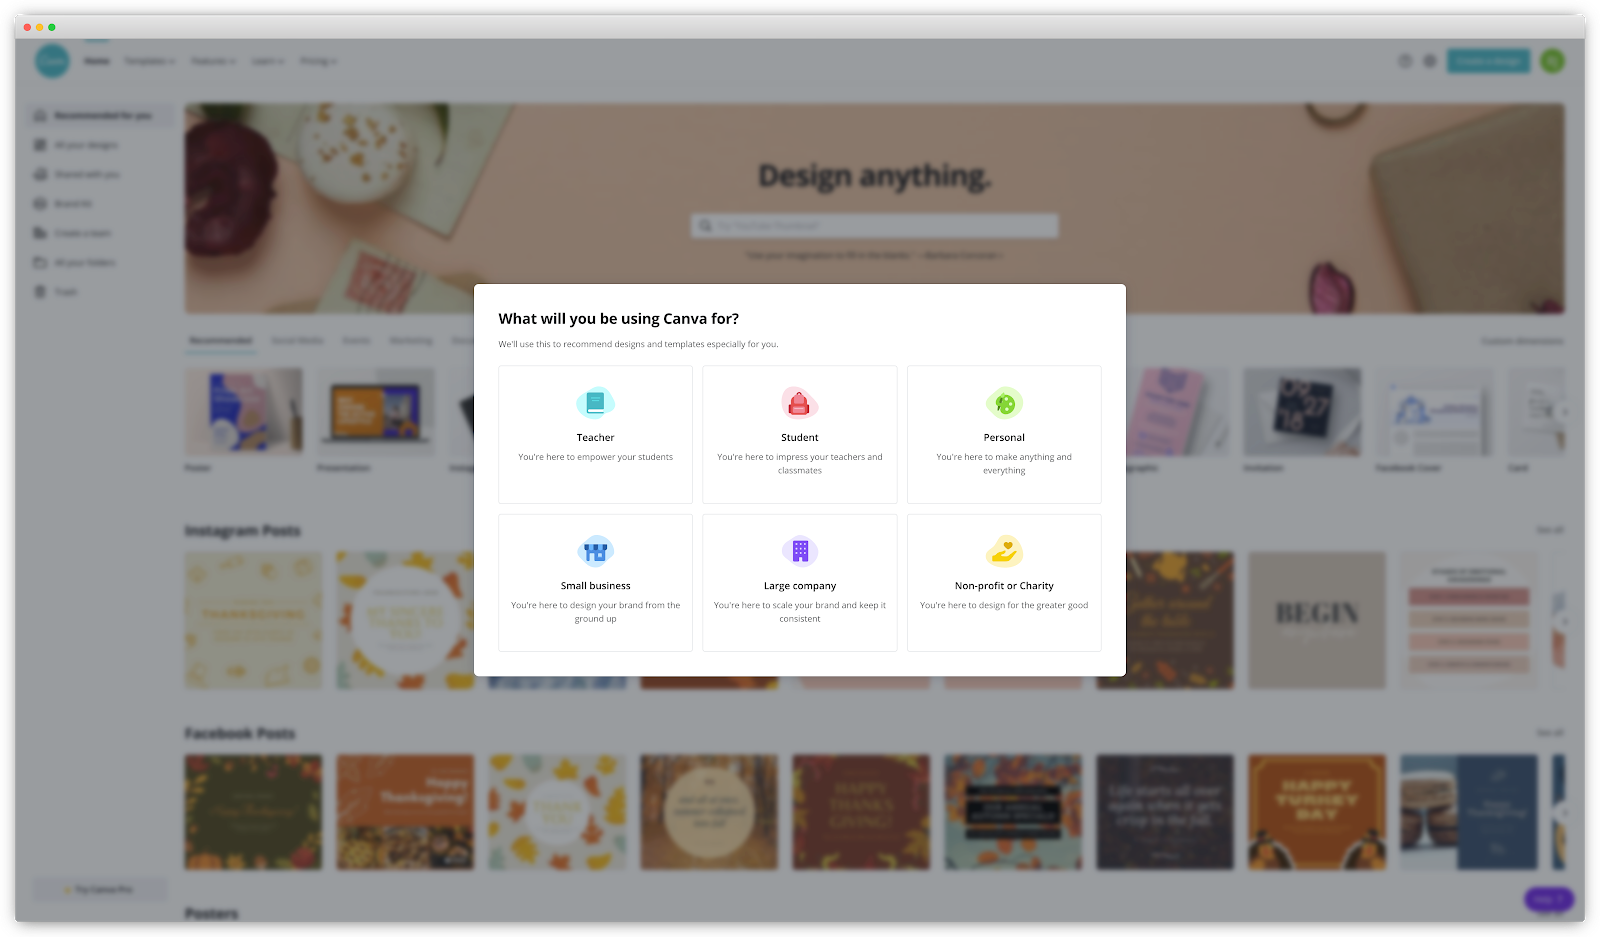 Canva's user onboarding